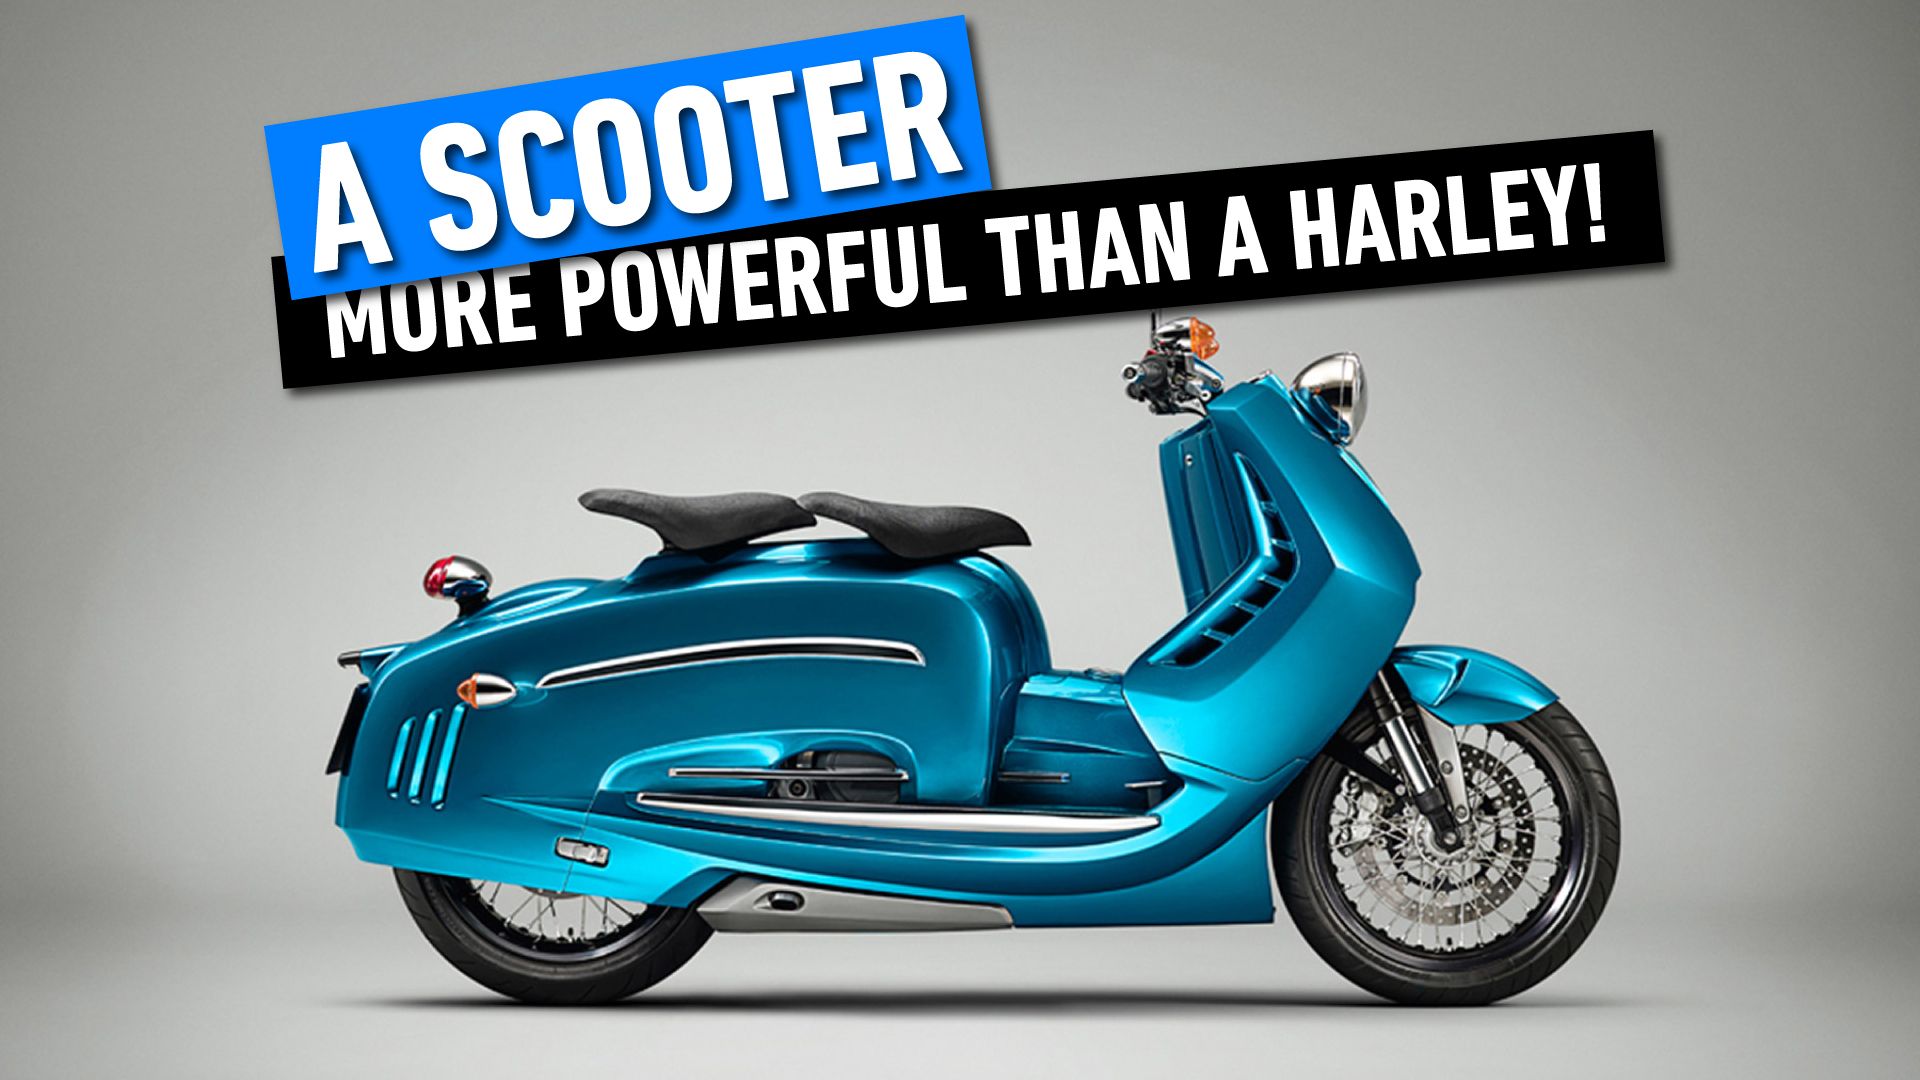 Scooter-That's-More-Powerful-Than-A-Harley-Davidson-Iron-883